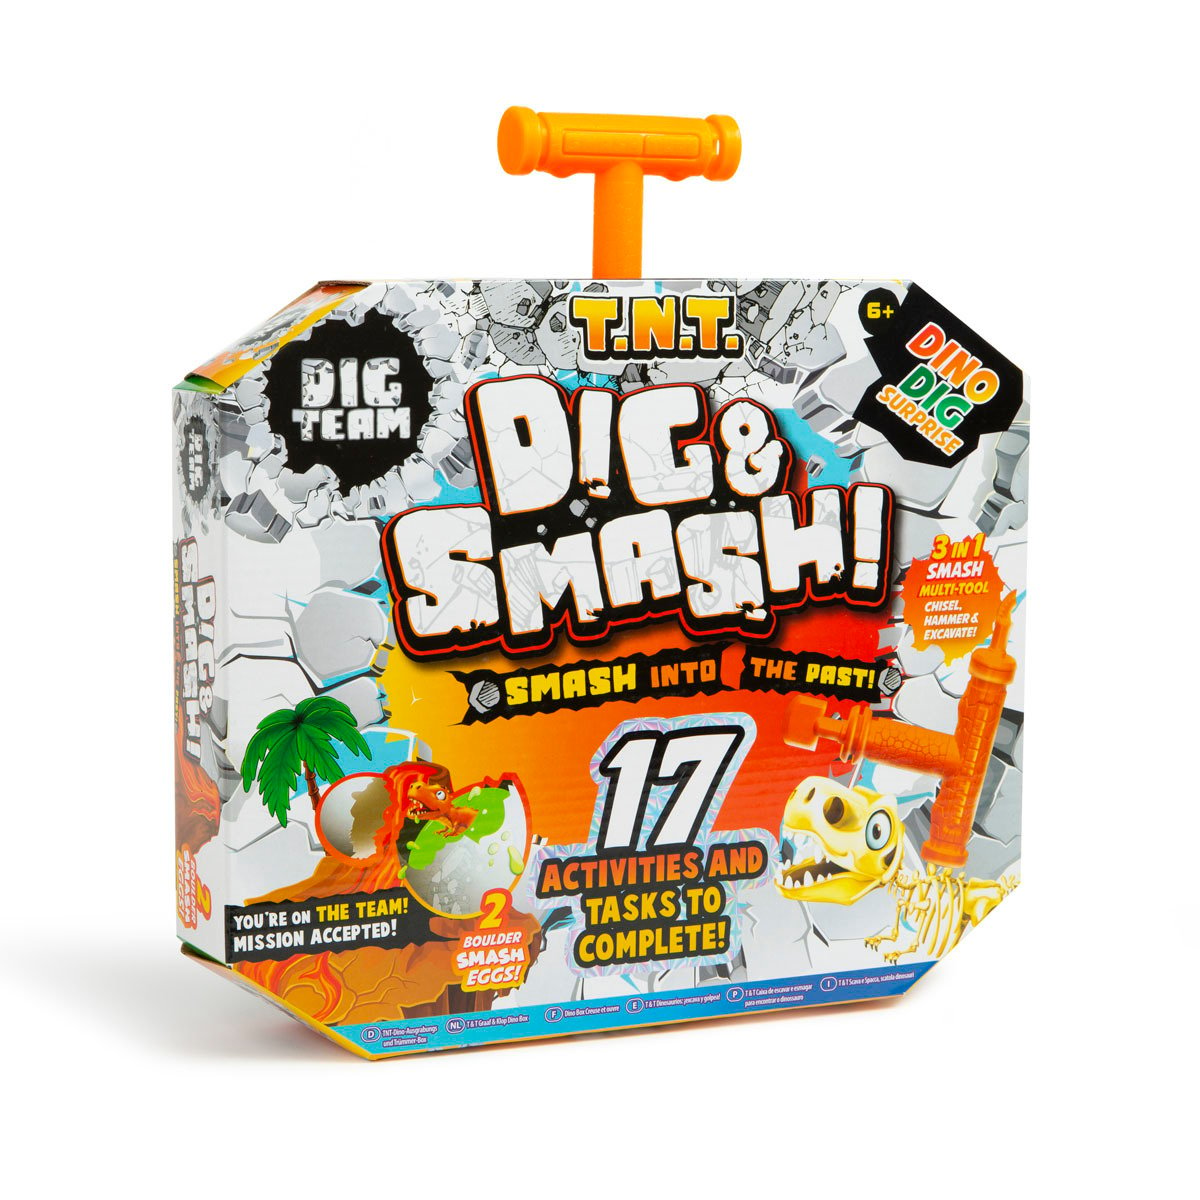 View the best prices for: Dig & Smash! Dinosaur Dig Surprise Playset